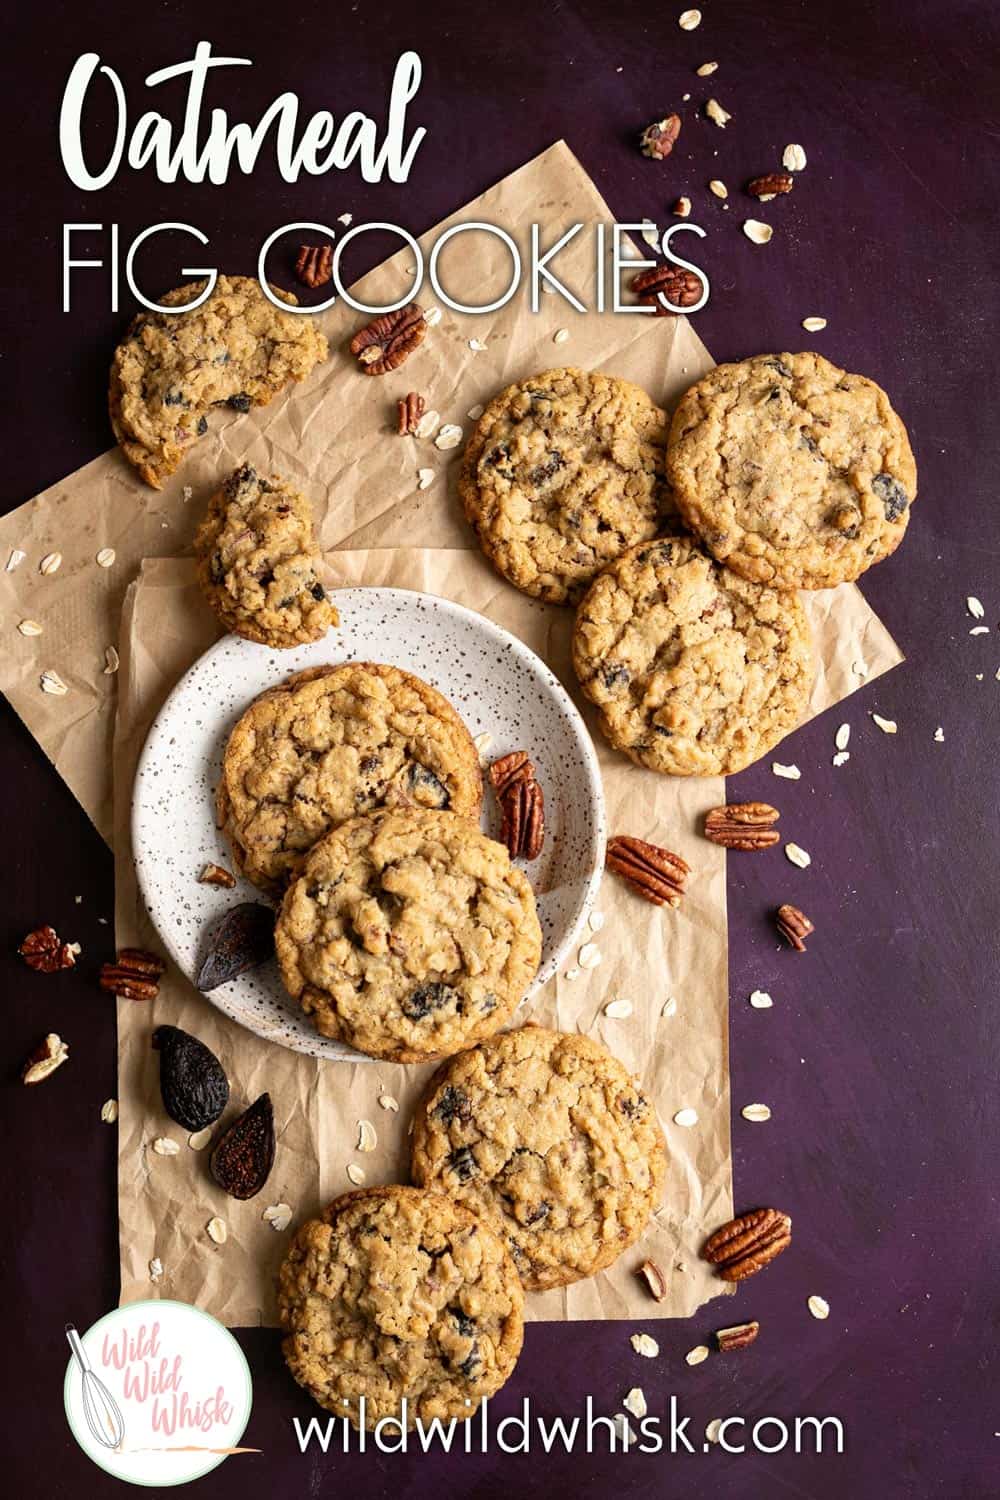 These delicious Fig Oatmeal Cookies are the absolute best and will win over even the pickiest of cookie eaters. Figs and pecans make a wonderful addition to these chewy old fashioned oatmeal cookies. #wildwildwhisk #oatmealcookies #oatcookies #cookies #driedfig #driedfigs #figs #figrecipes #pecans #cookierecipes